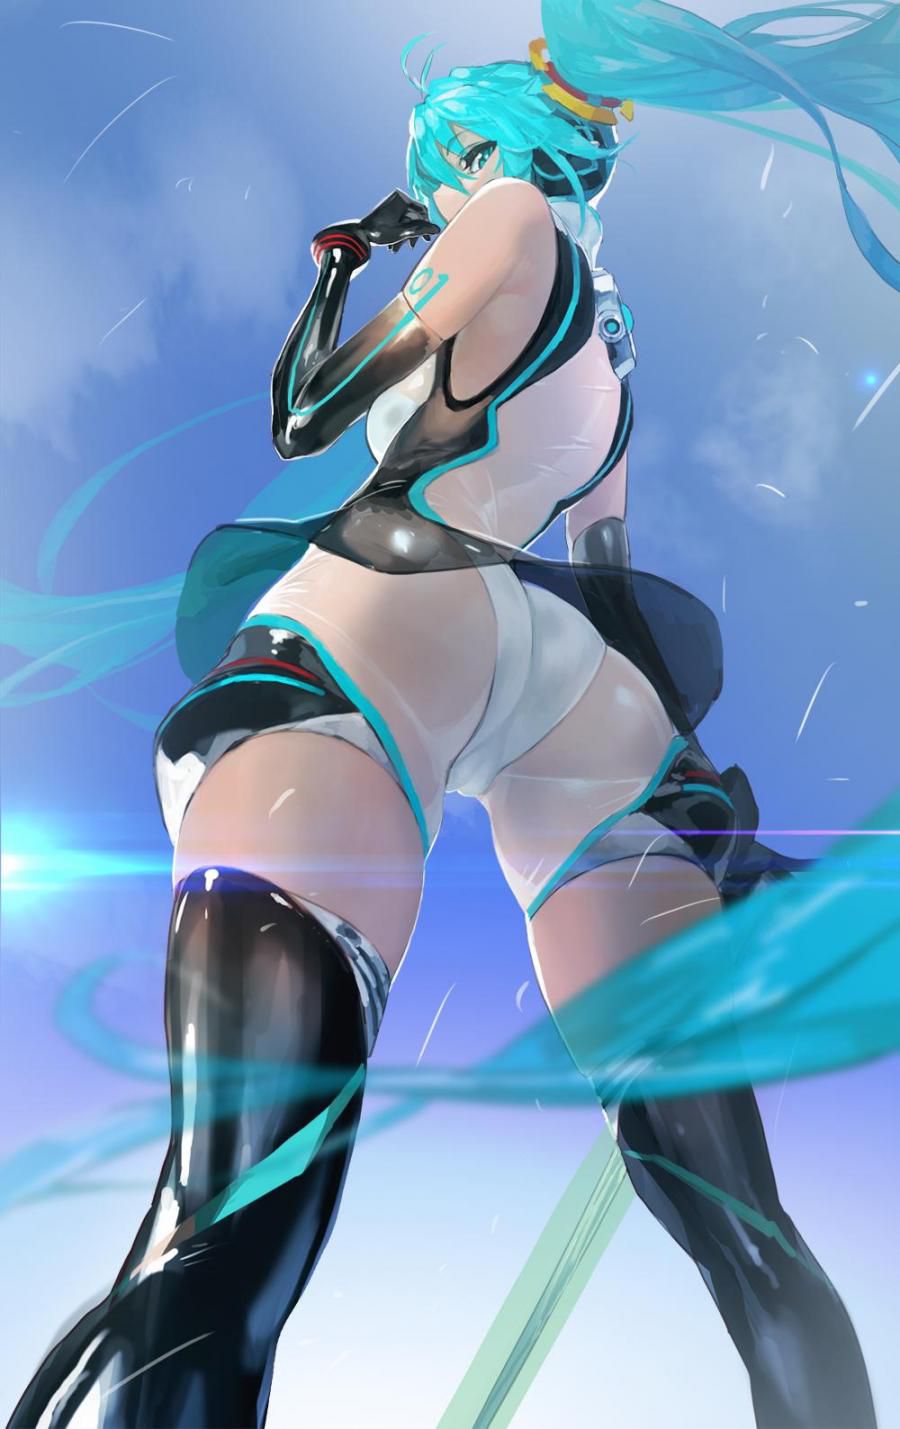 Erotic image that can be pulled out just by imagining hatsune Miku's masturbation figure [vocalist lloyd] 38